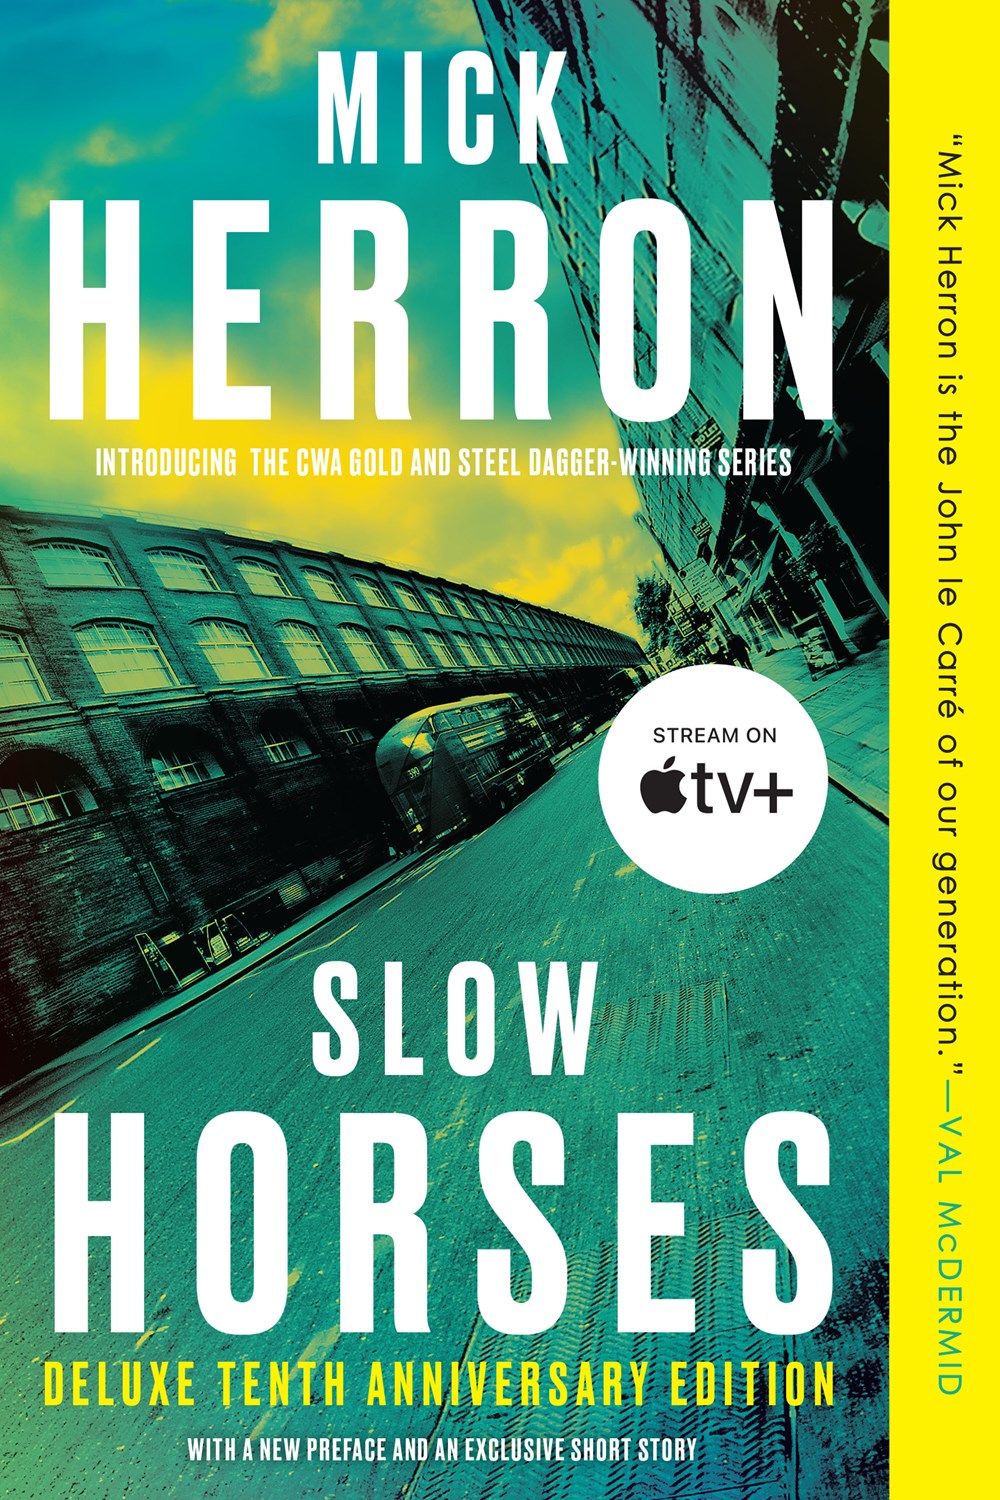 Slow Horses by Mick Herron (Deluxe 10th Anniversary Edition)